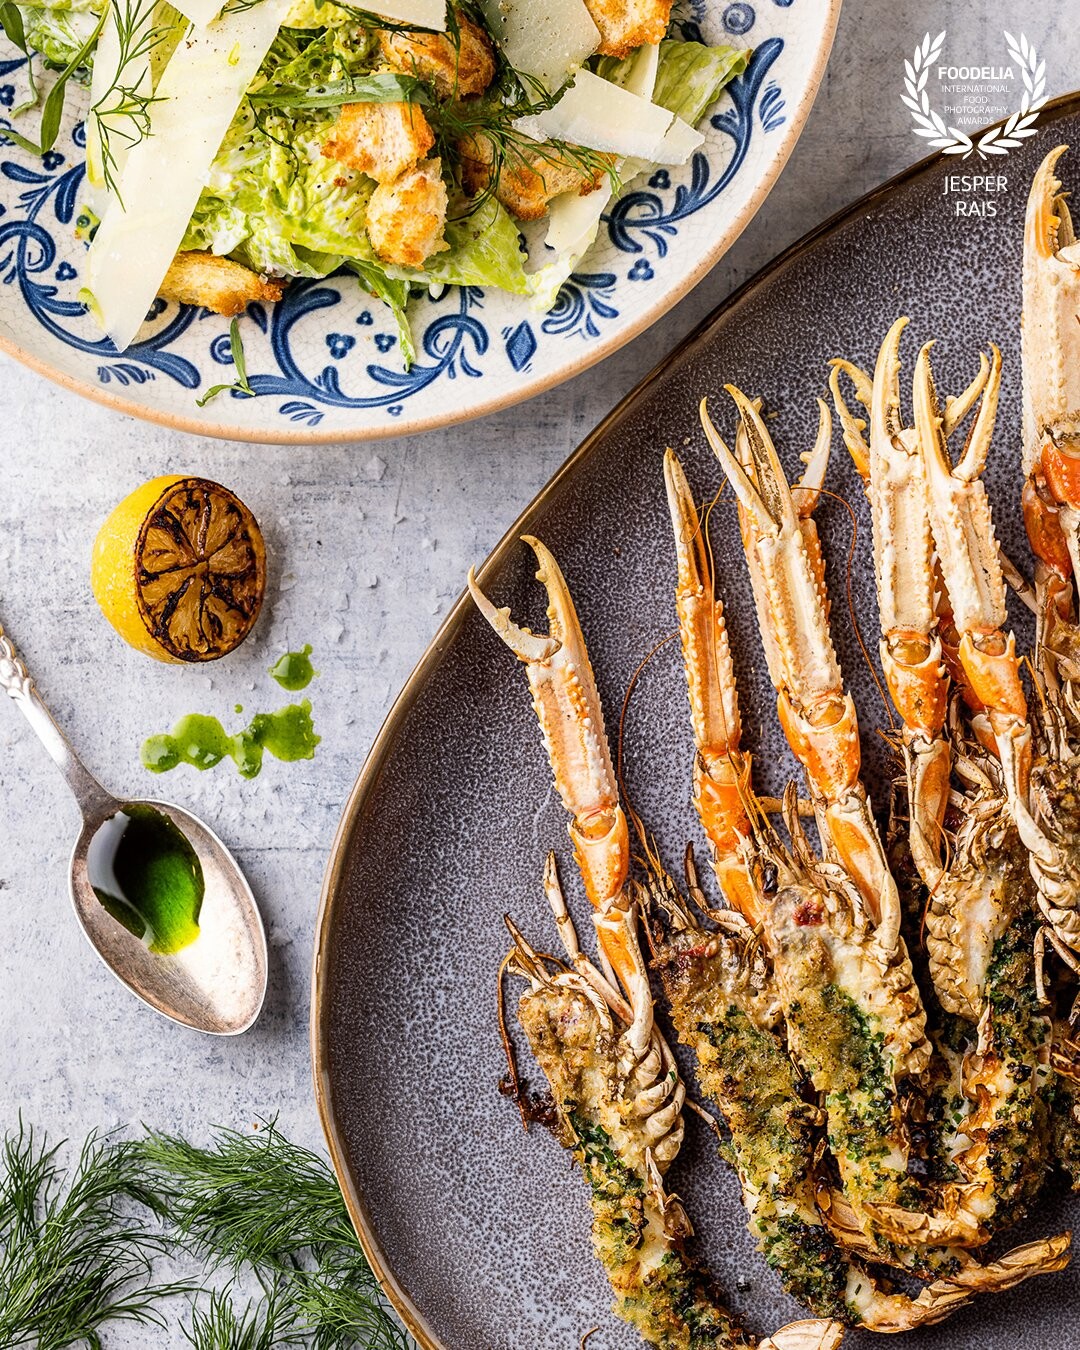 Grilled langoustine made with a salad "Caesar-style" from the newest book "SHELLFISH" by photographer @raisfoto and chef @dennisrafn from Denmark